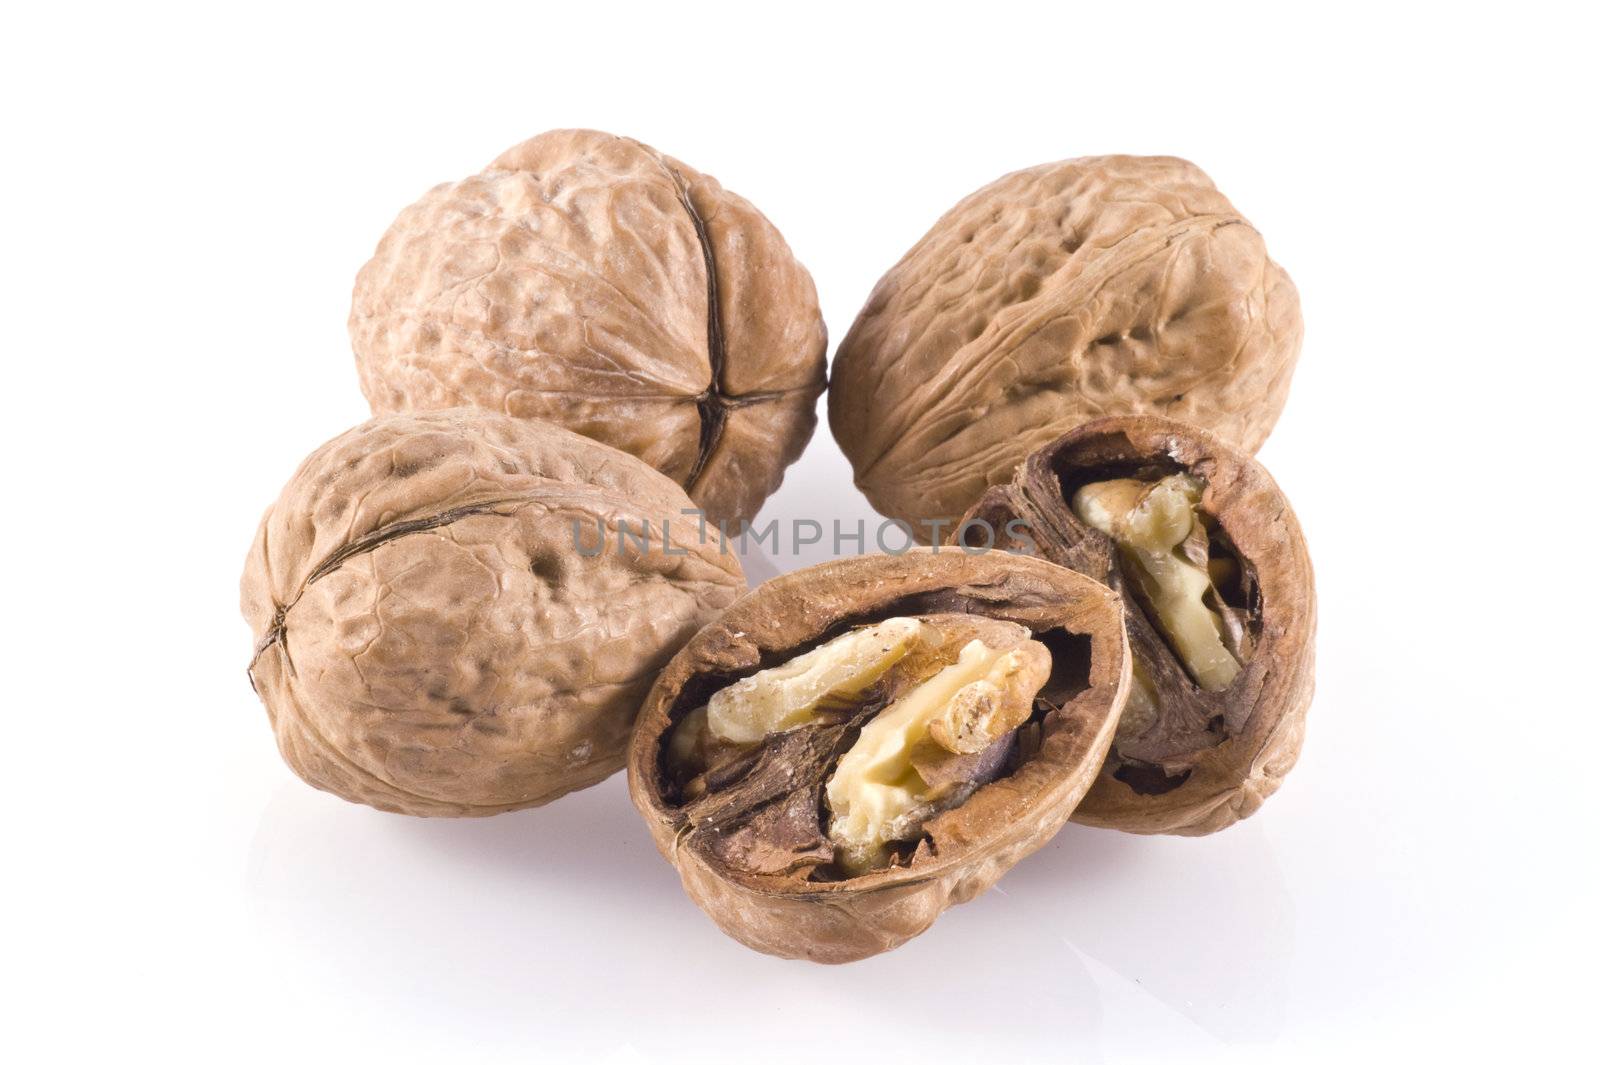 Walnuts, three whole nuts and one cracked, isolated on white.